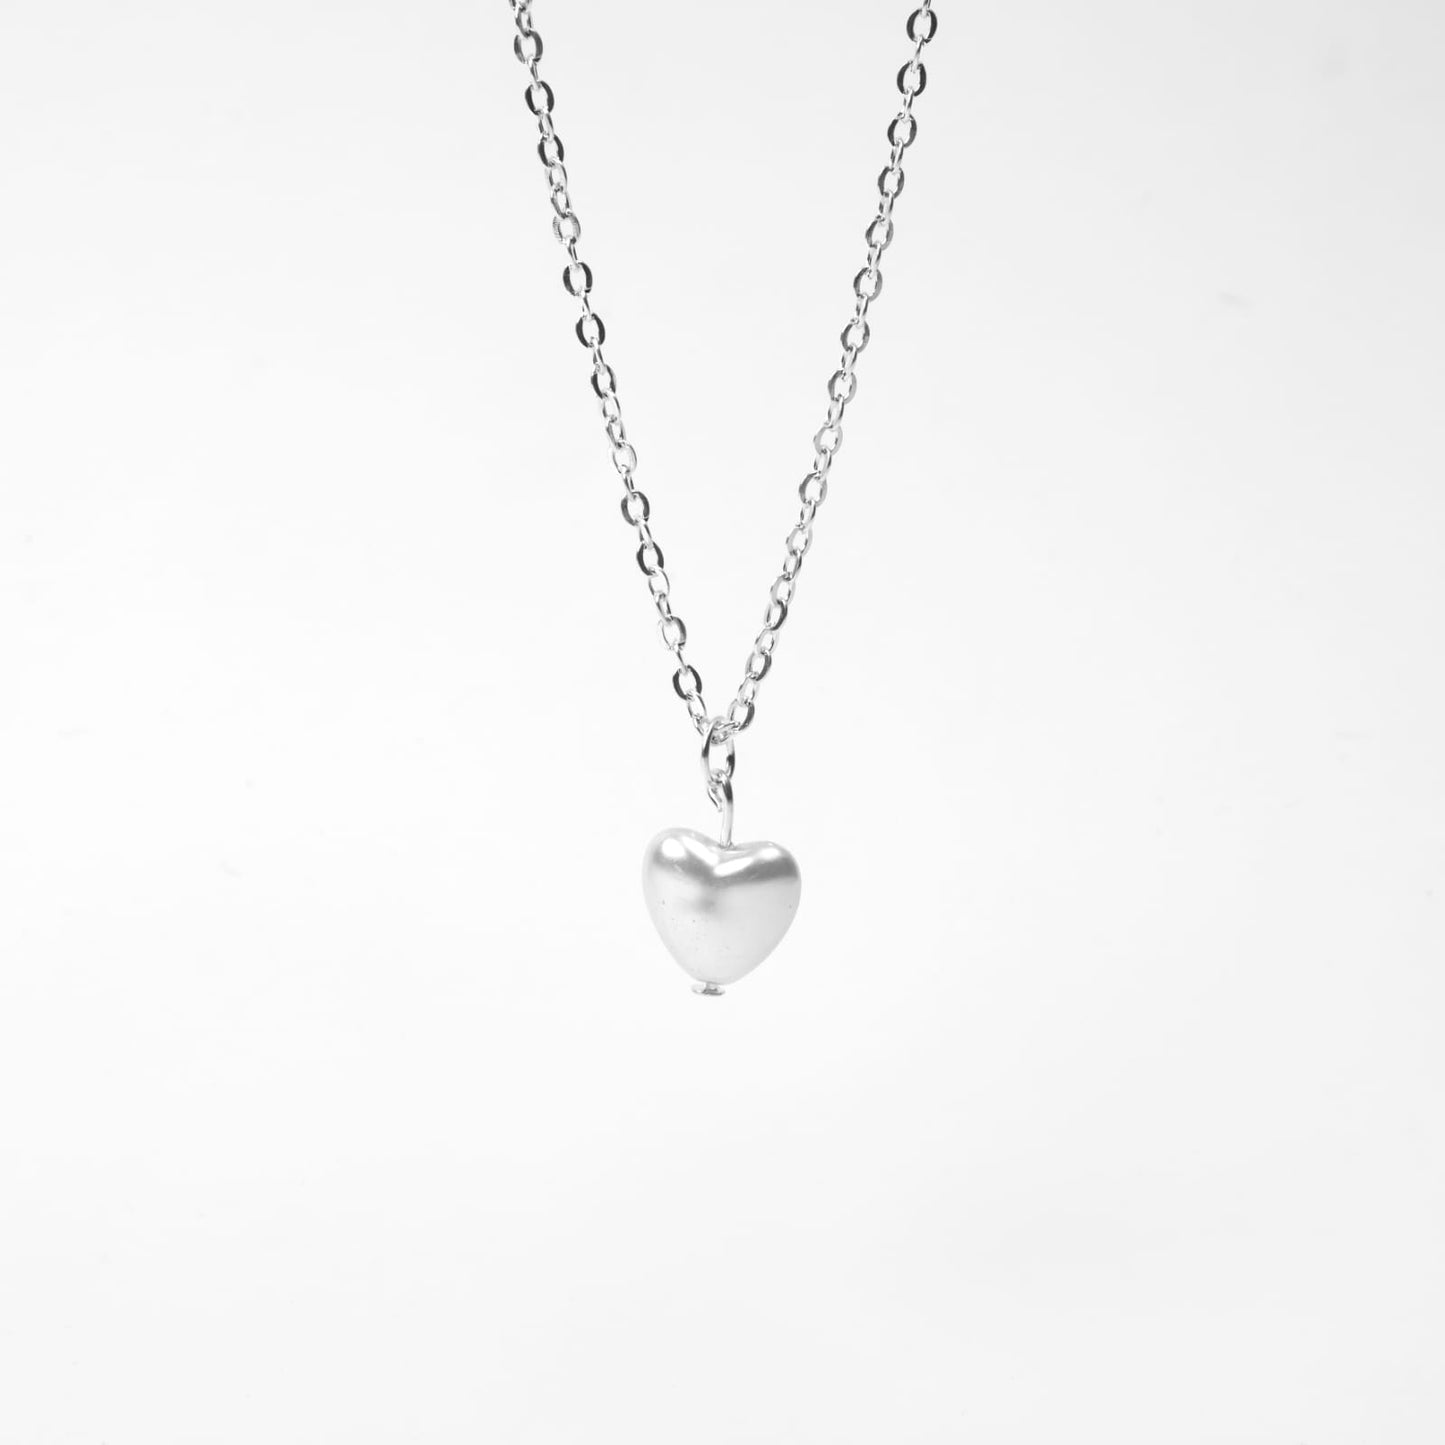 GOLDEN LINK CHAIN WITH PEARL HEART NECKLACE